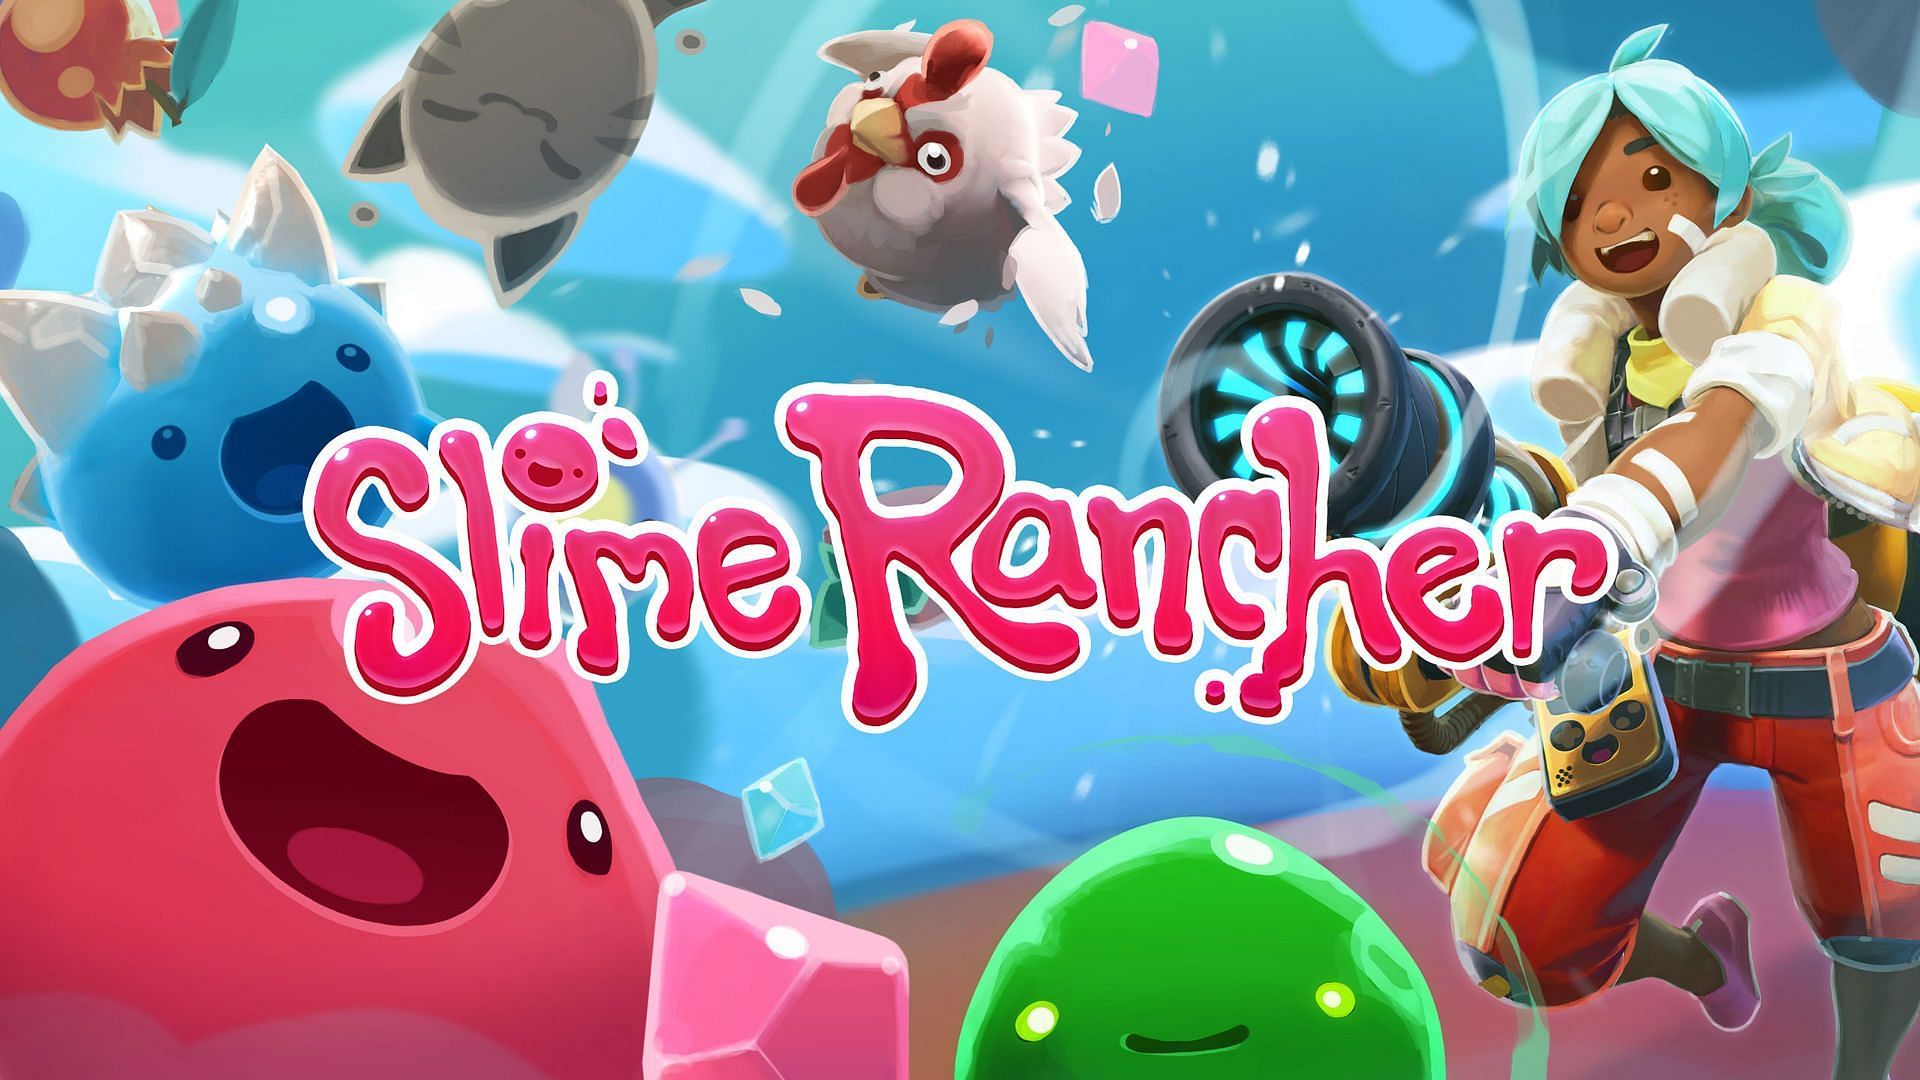 Slime Rancher is a first-person Metroidvania-style game. (Image via Monomi Park)